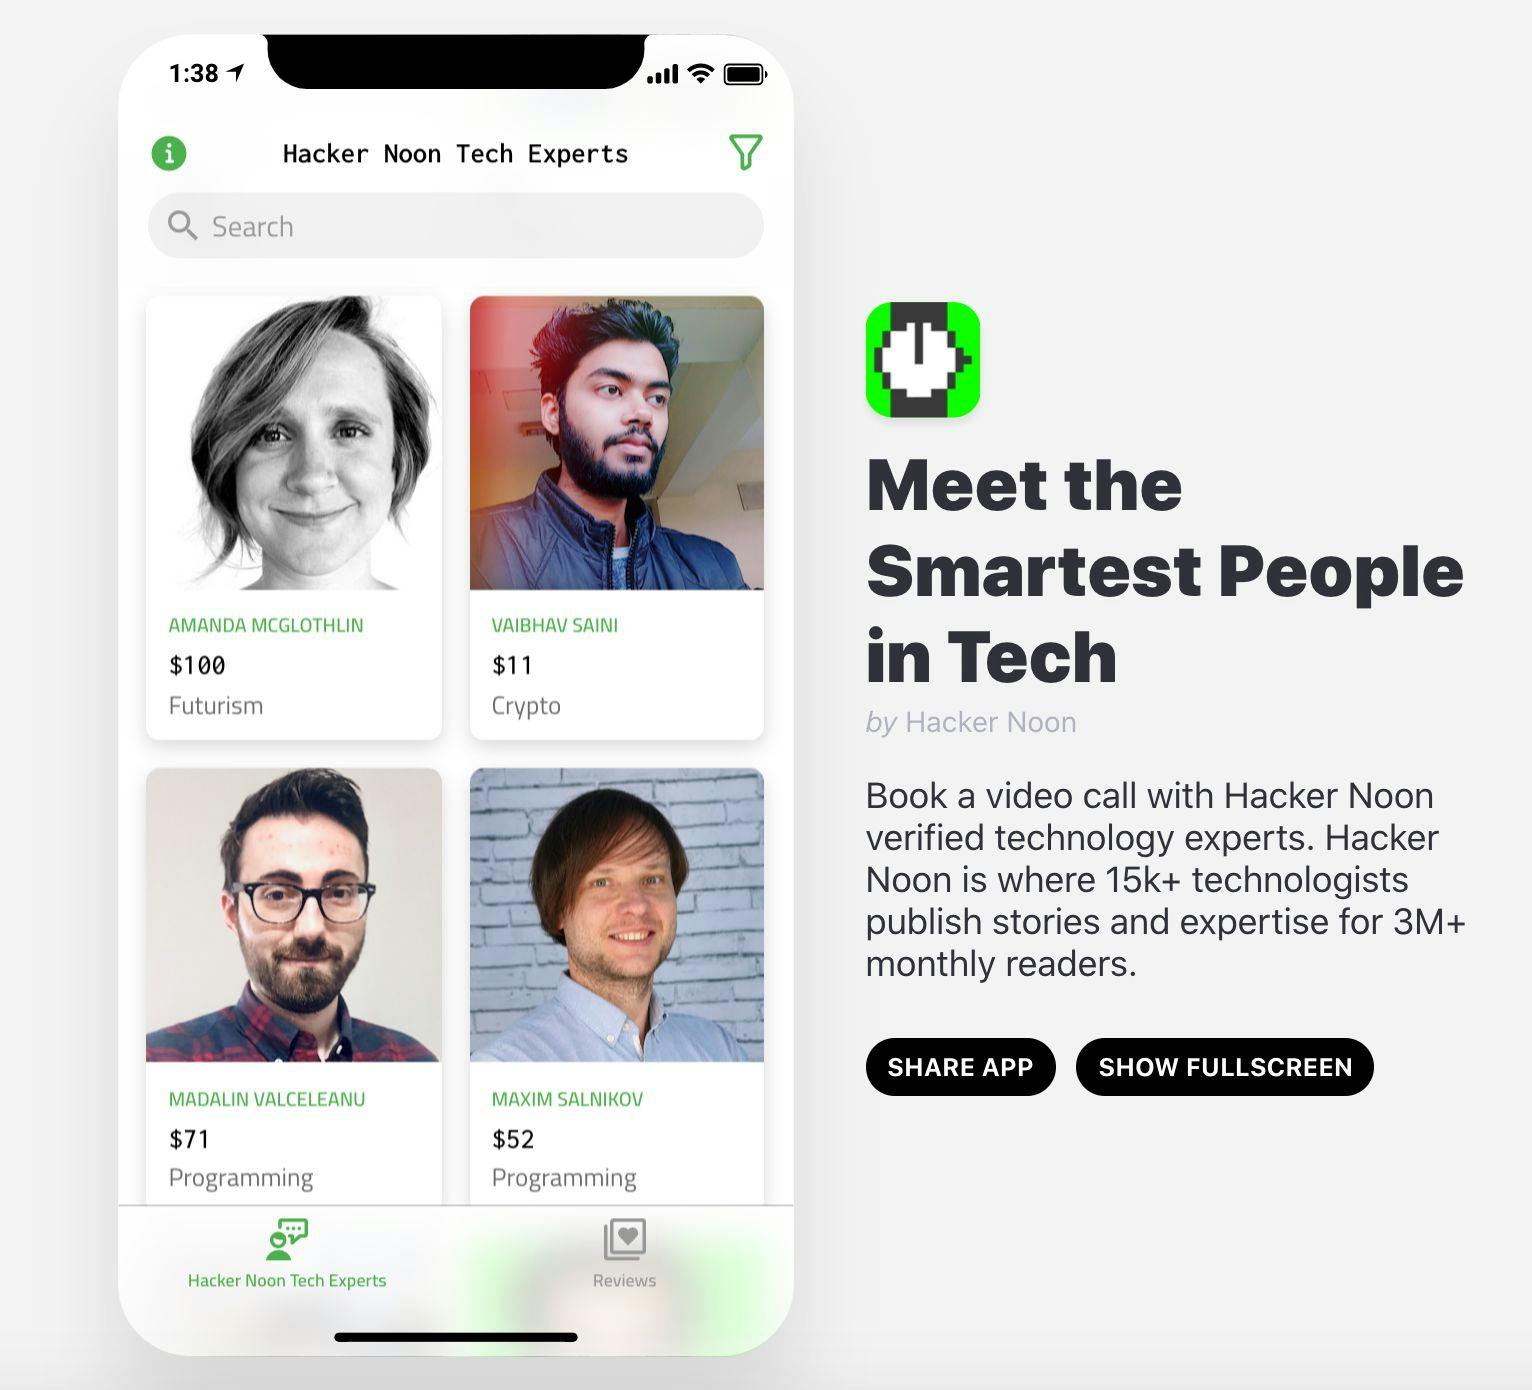 featured image - Hacker Noon Experts: Brief Video Calls with Tech Experts 